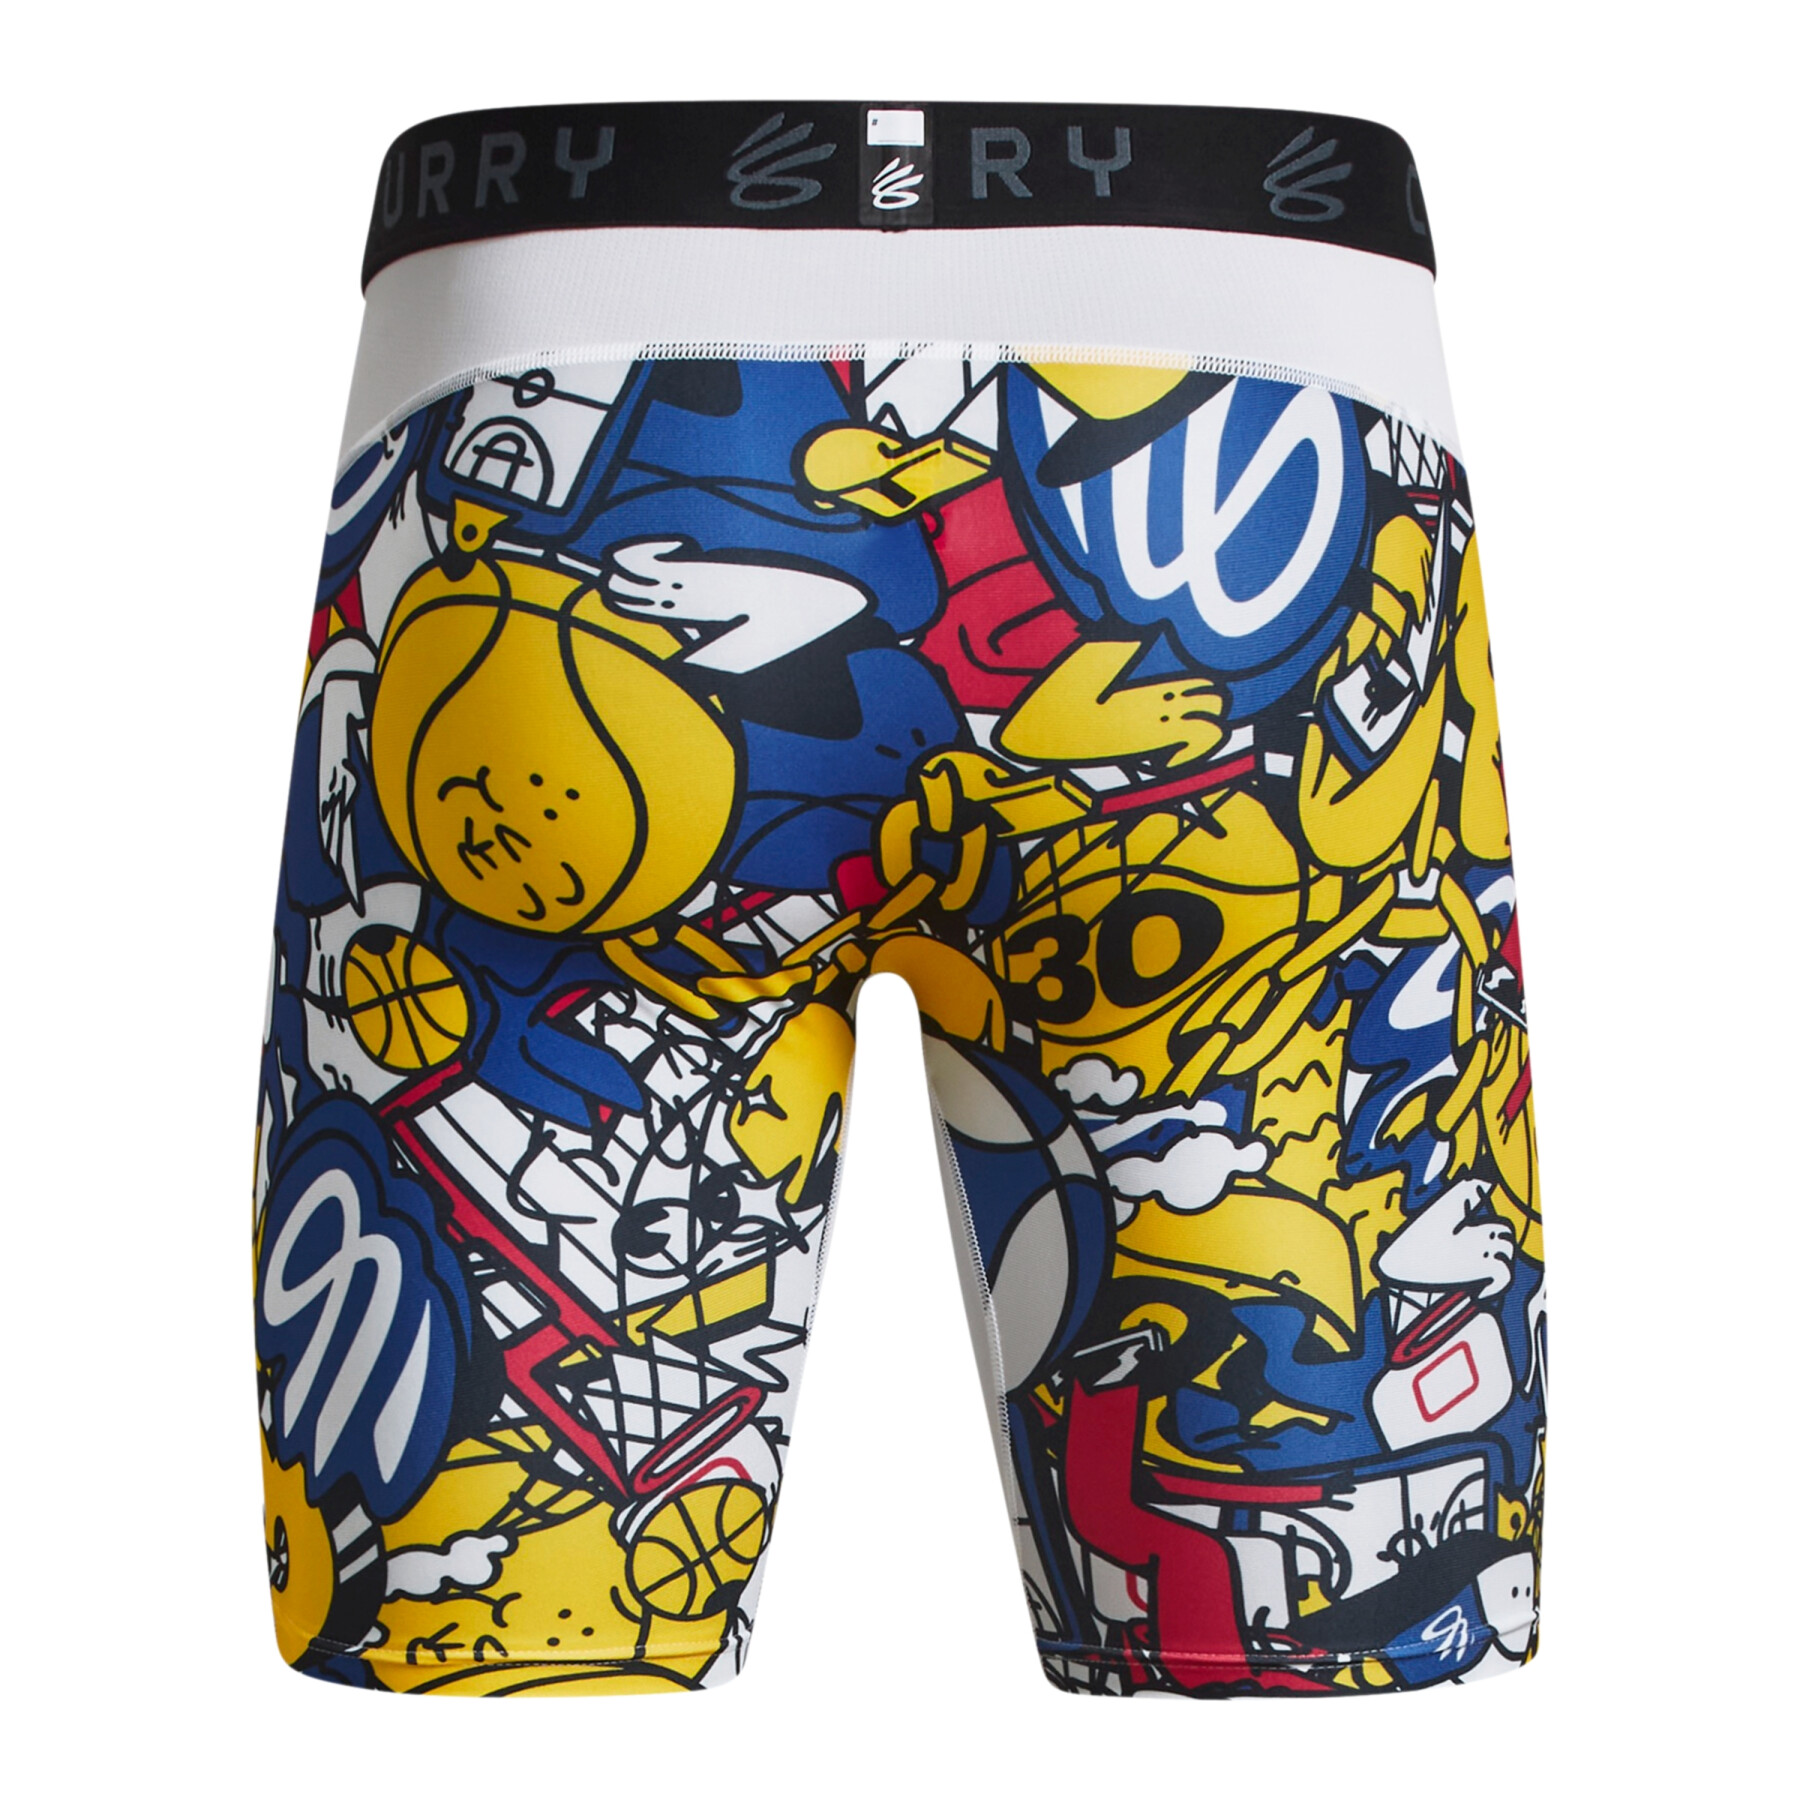 Printed shorts Under Armour Curry HG